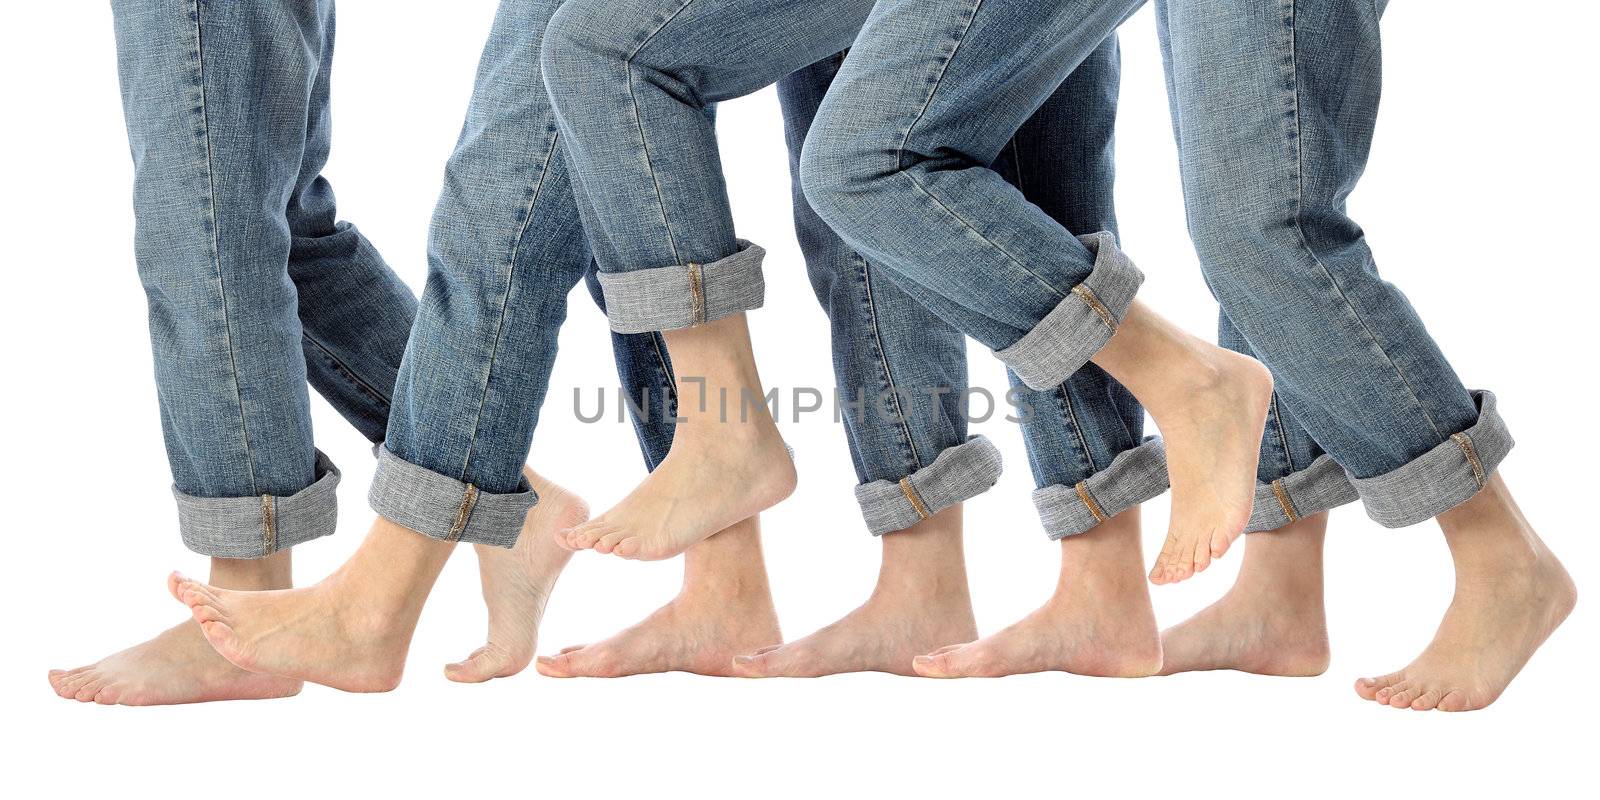 A womans bare feet advance one step forward in rolled up jeans on white